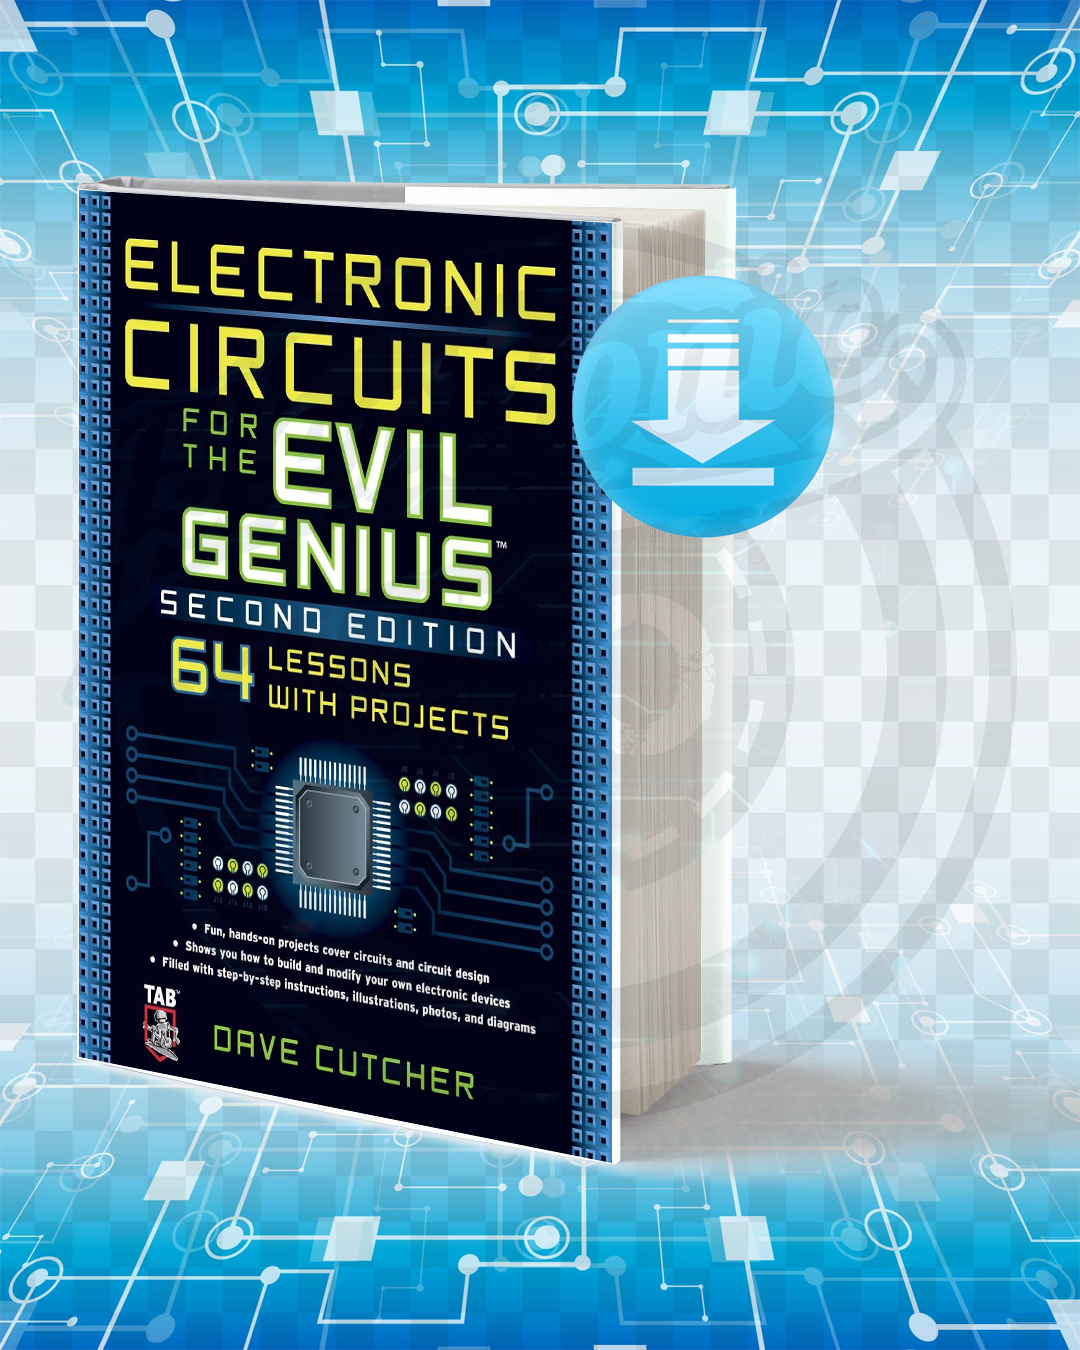 Download Electronic Circuits For The Evil Genius Pdf